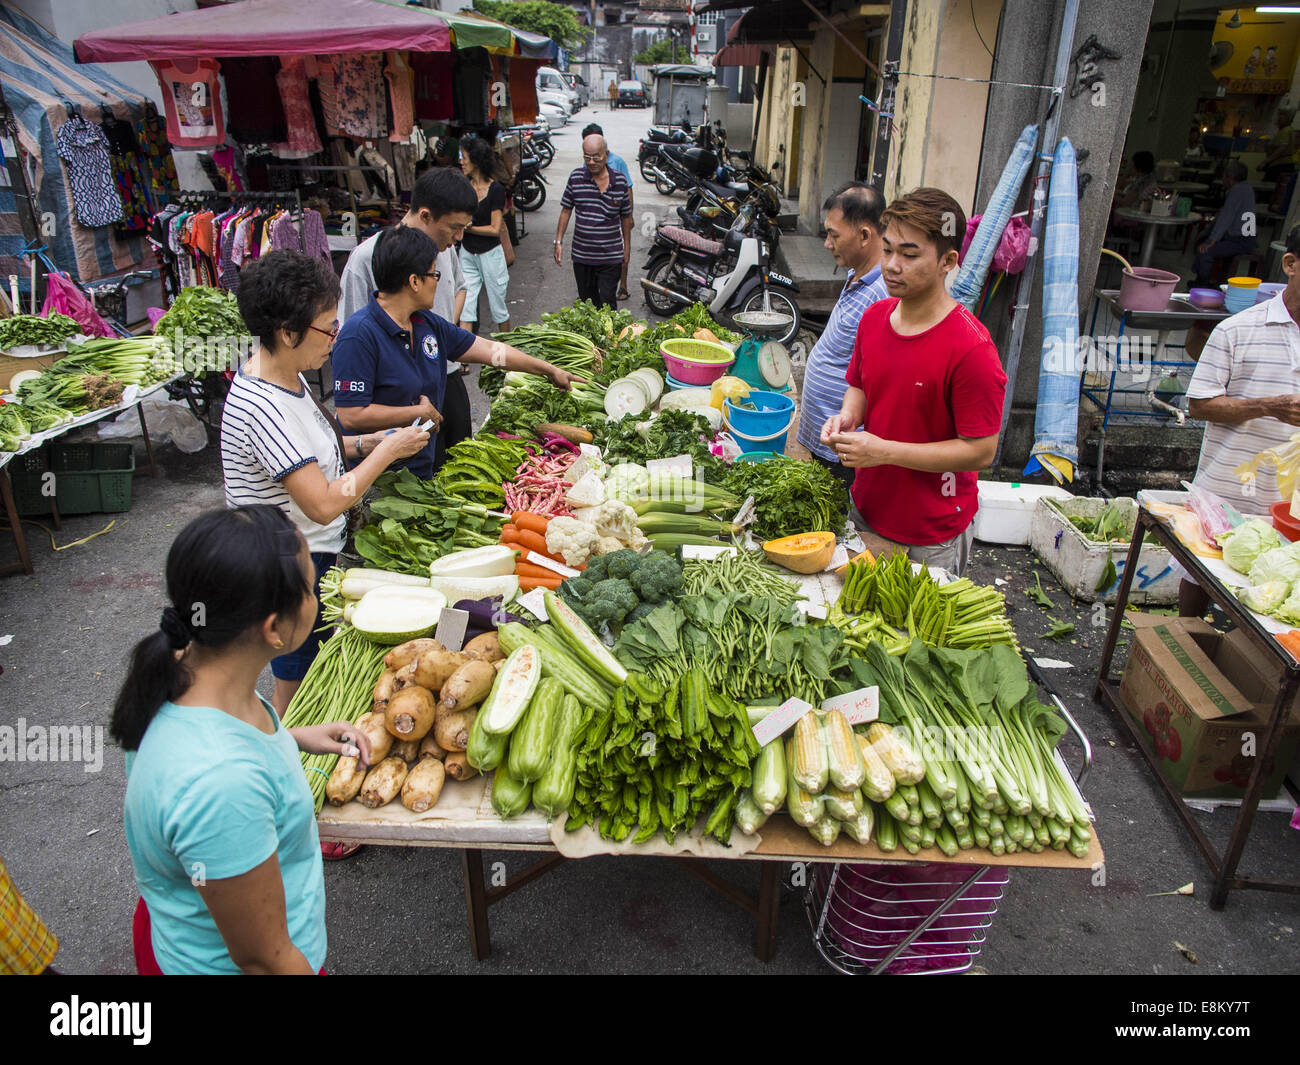 George Town, Penang, Malaysia. 7th Oct, 2014. A market in George Town